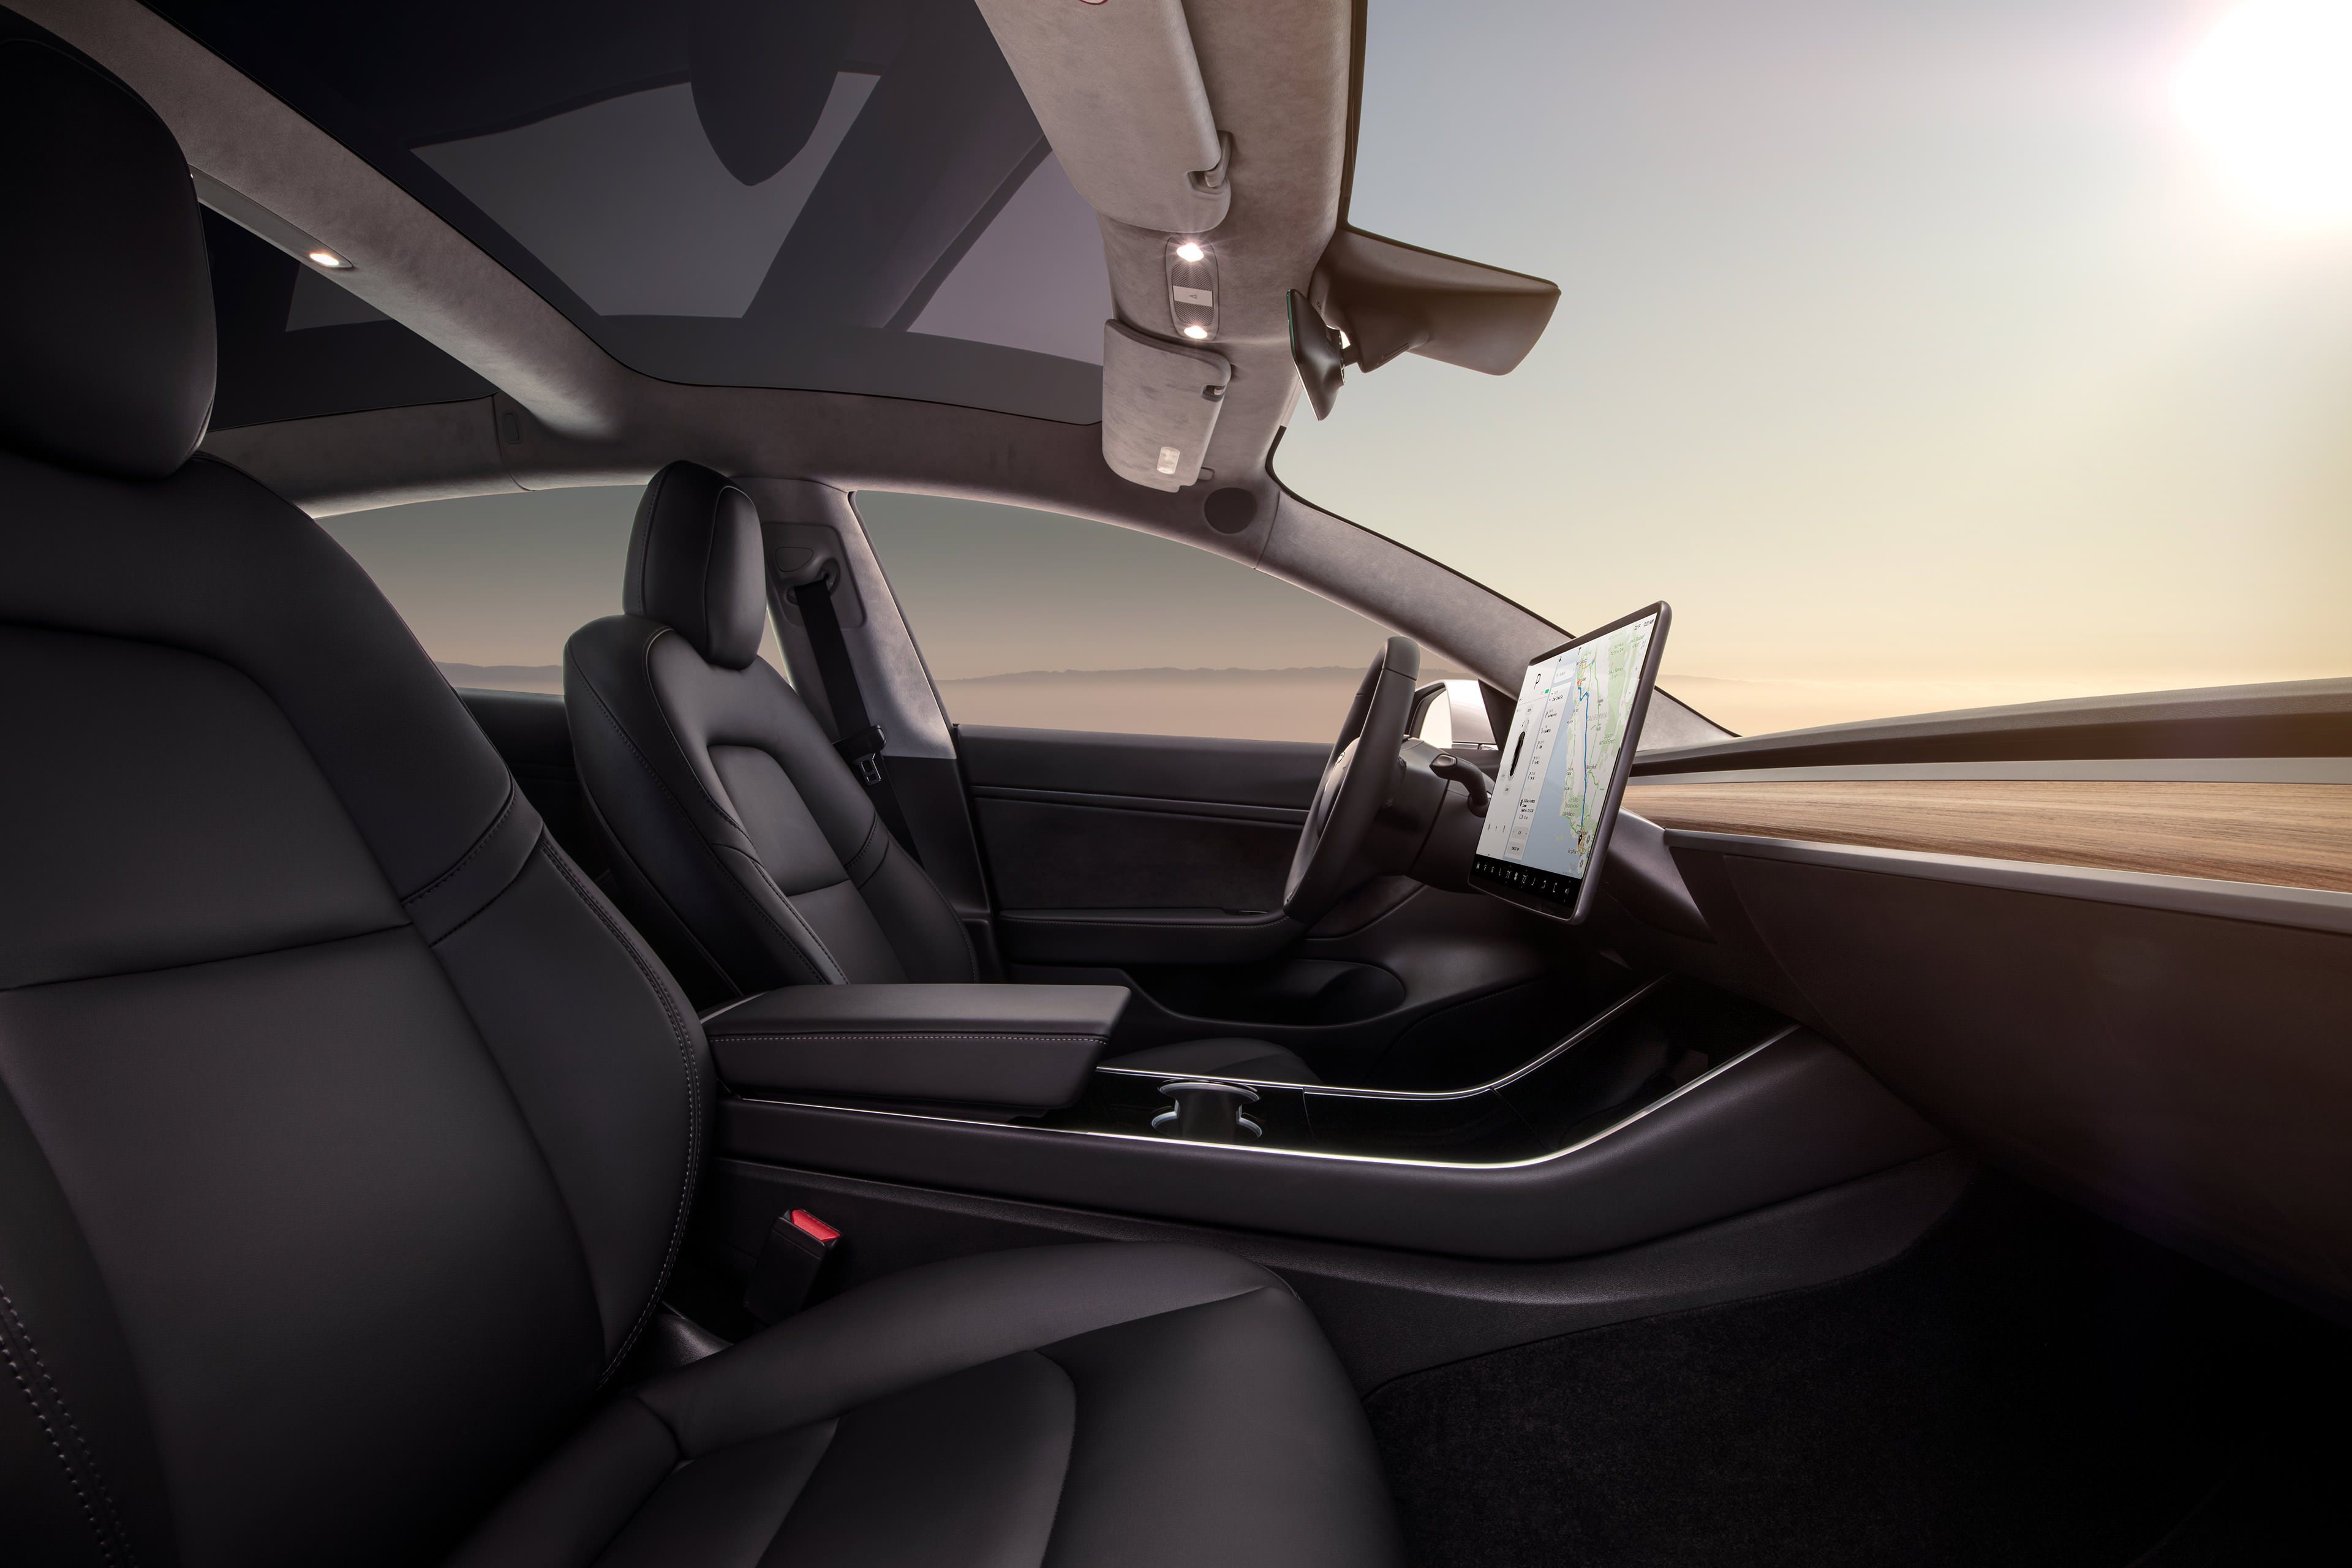 So the inside of the awaited Tesla Model 3 really is like a spaceship